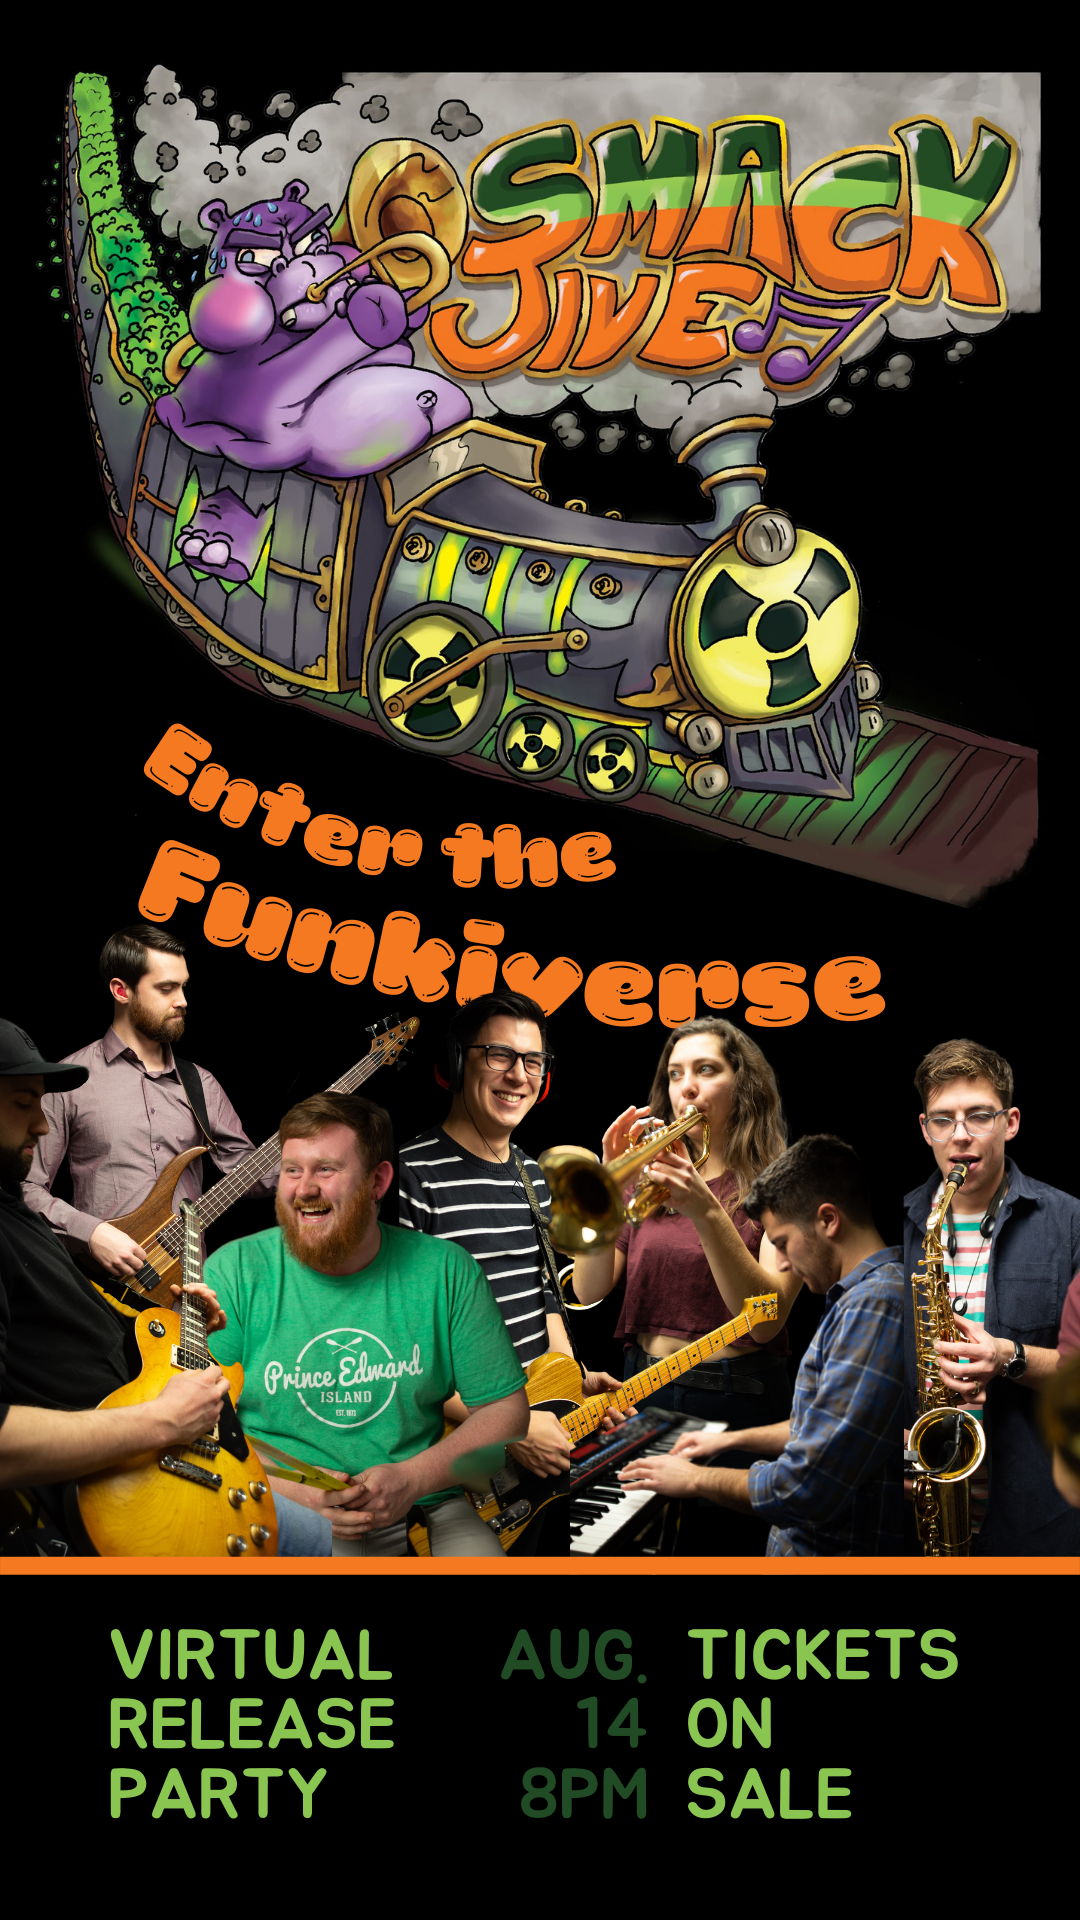 (SOLD OUT) Virtual Release: Smackjive - Enter the Funkiverse